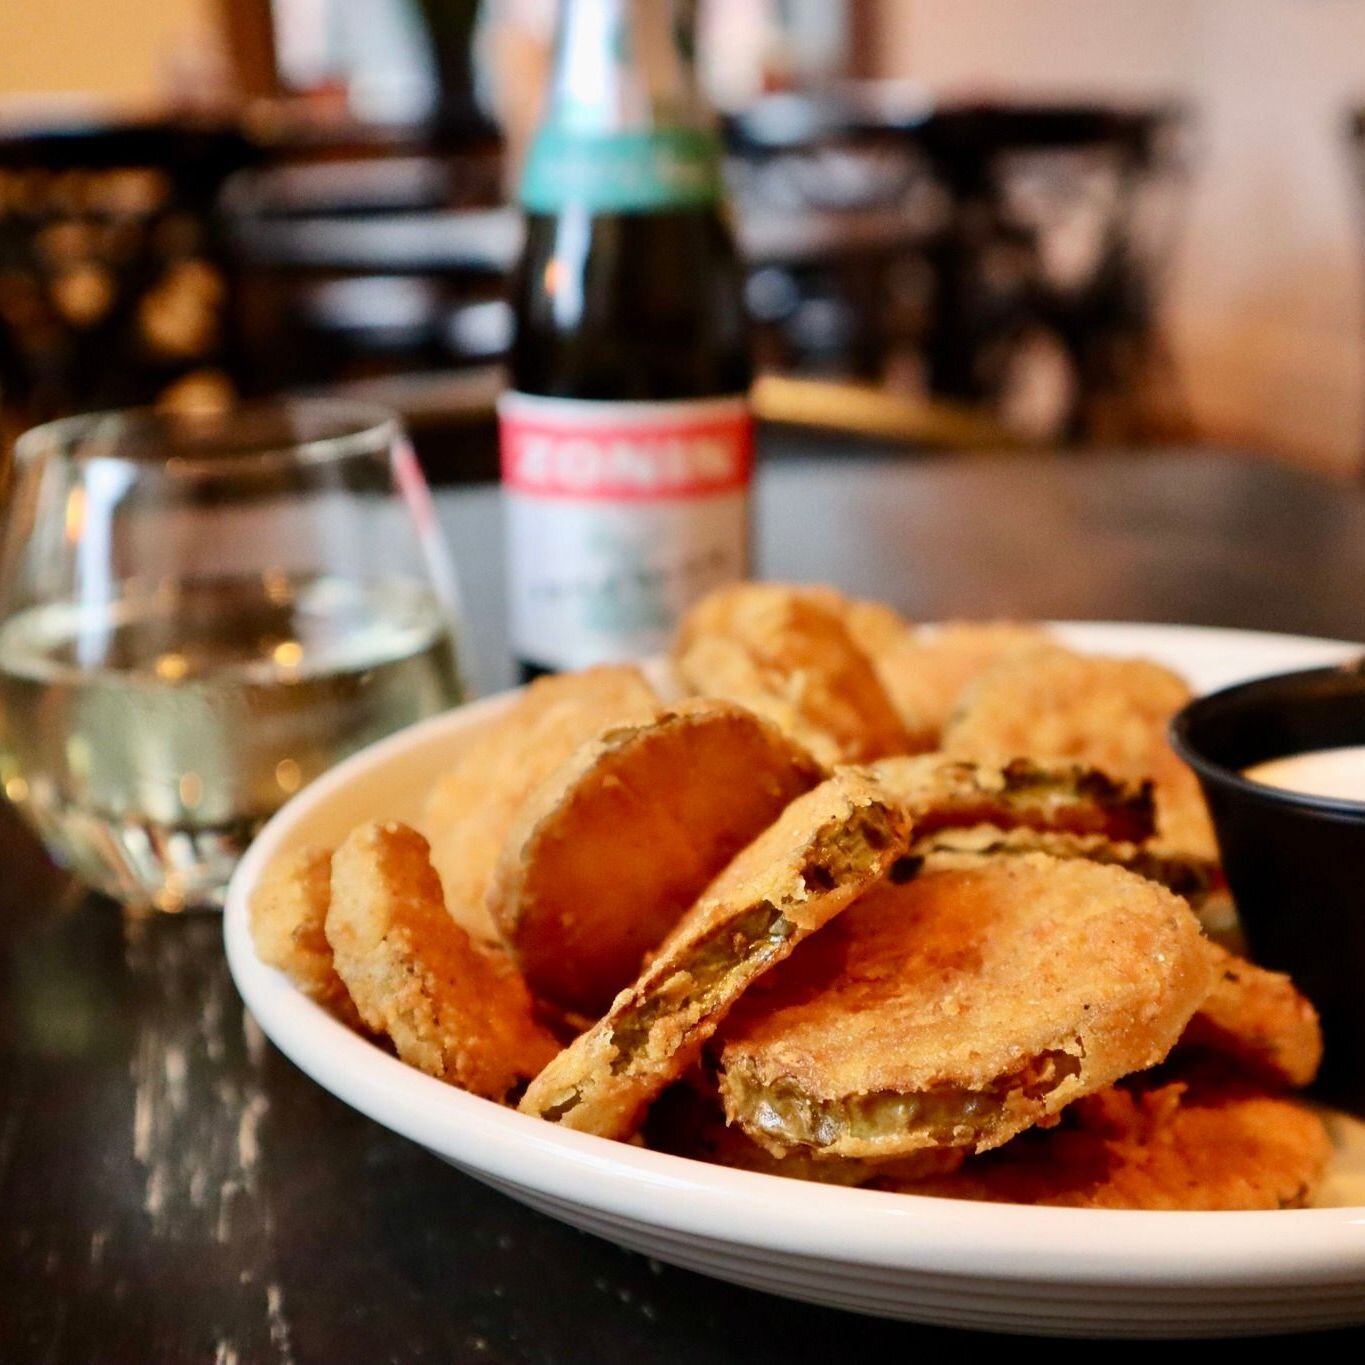 Come see why Zim's fried pickles are a fan favorite. Sliced pickles rolled in seasoned flour and fried with smoked tomato ranch. Drink at Thirsty and order food from @zimscafe!

We're located in the Old Courthouse at 215 West Main Street.
zimscafe.co